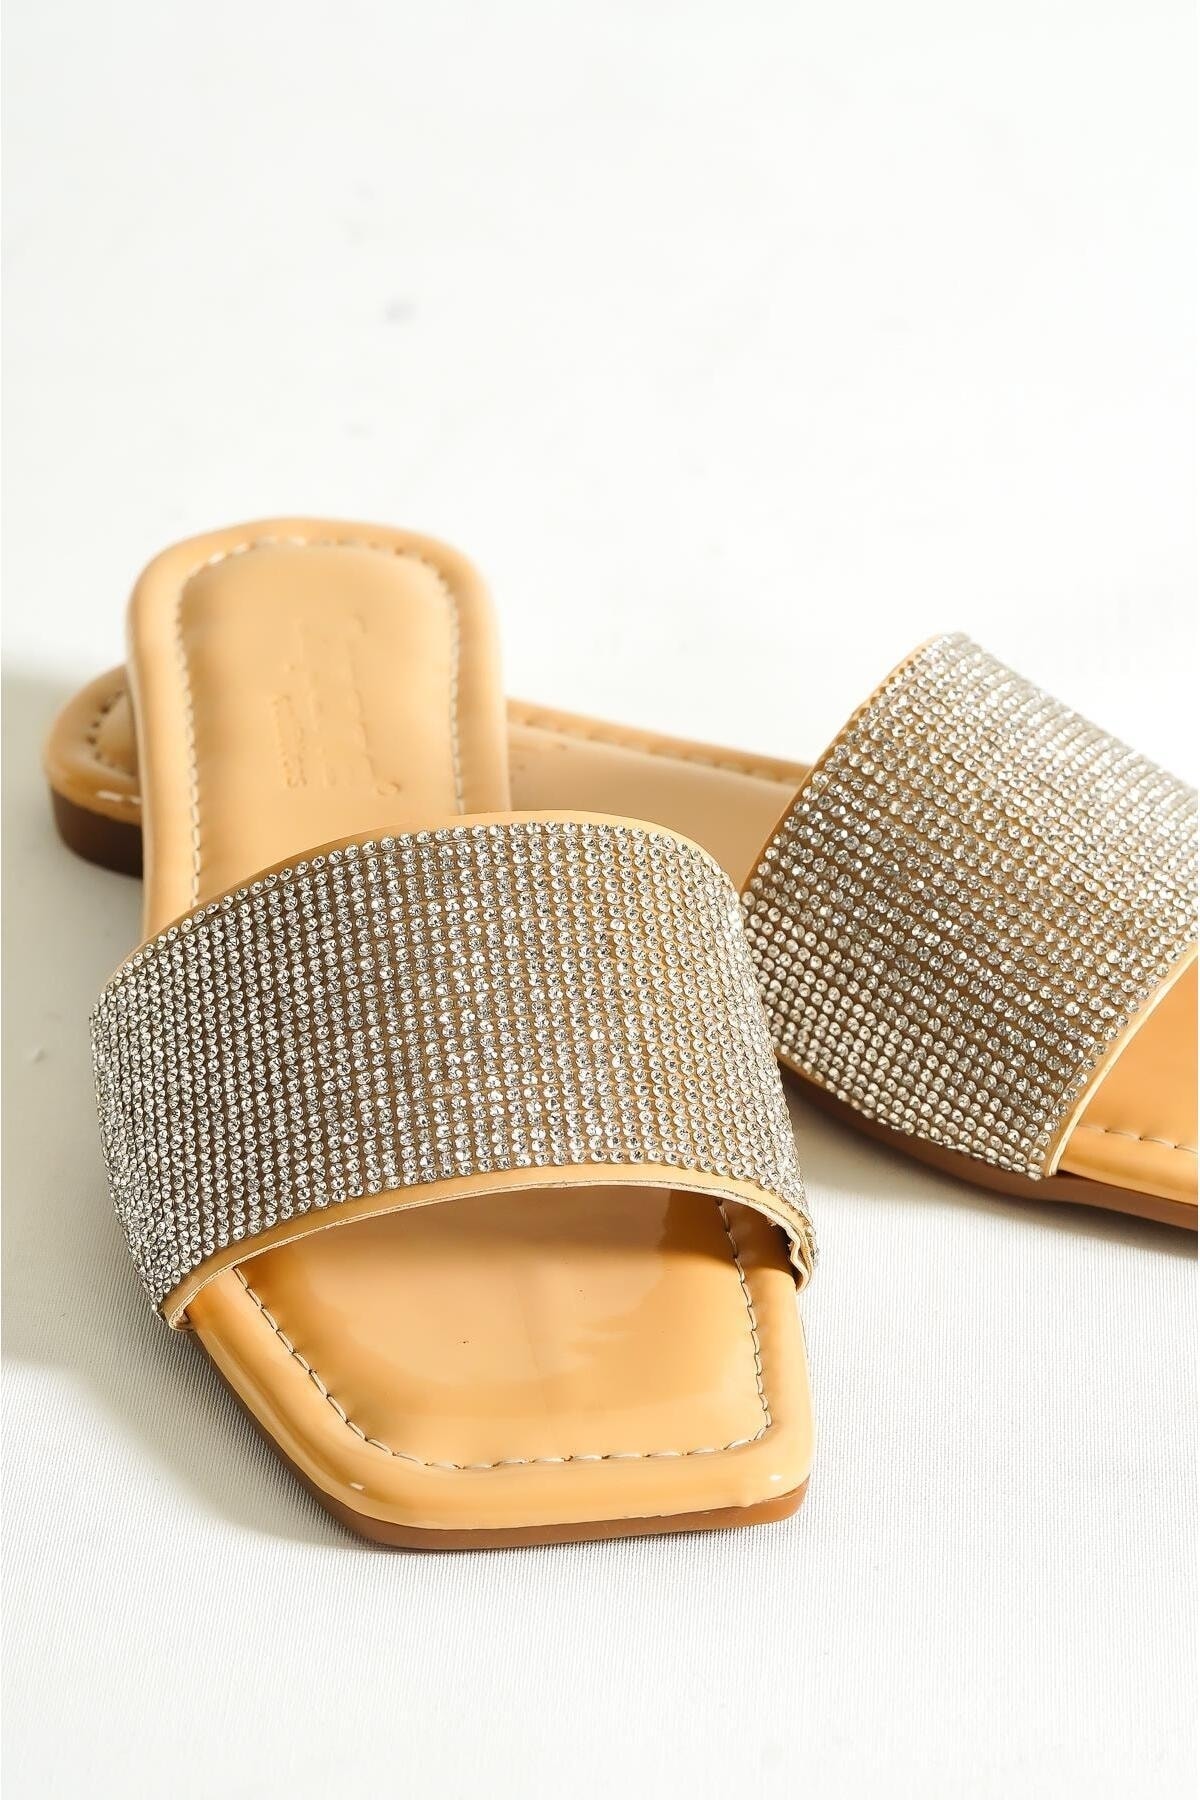 Capone Outfitters With Capone Stones, Single Strap, Flat Heel, Quilted Nude Women's Slippers.